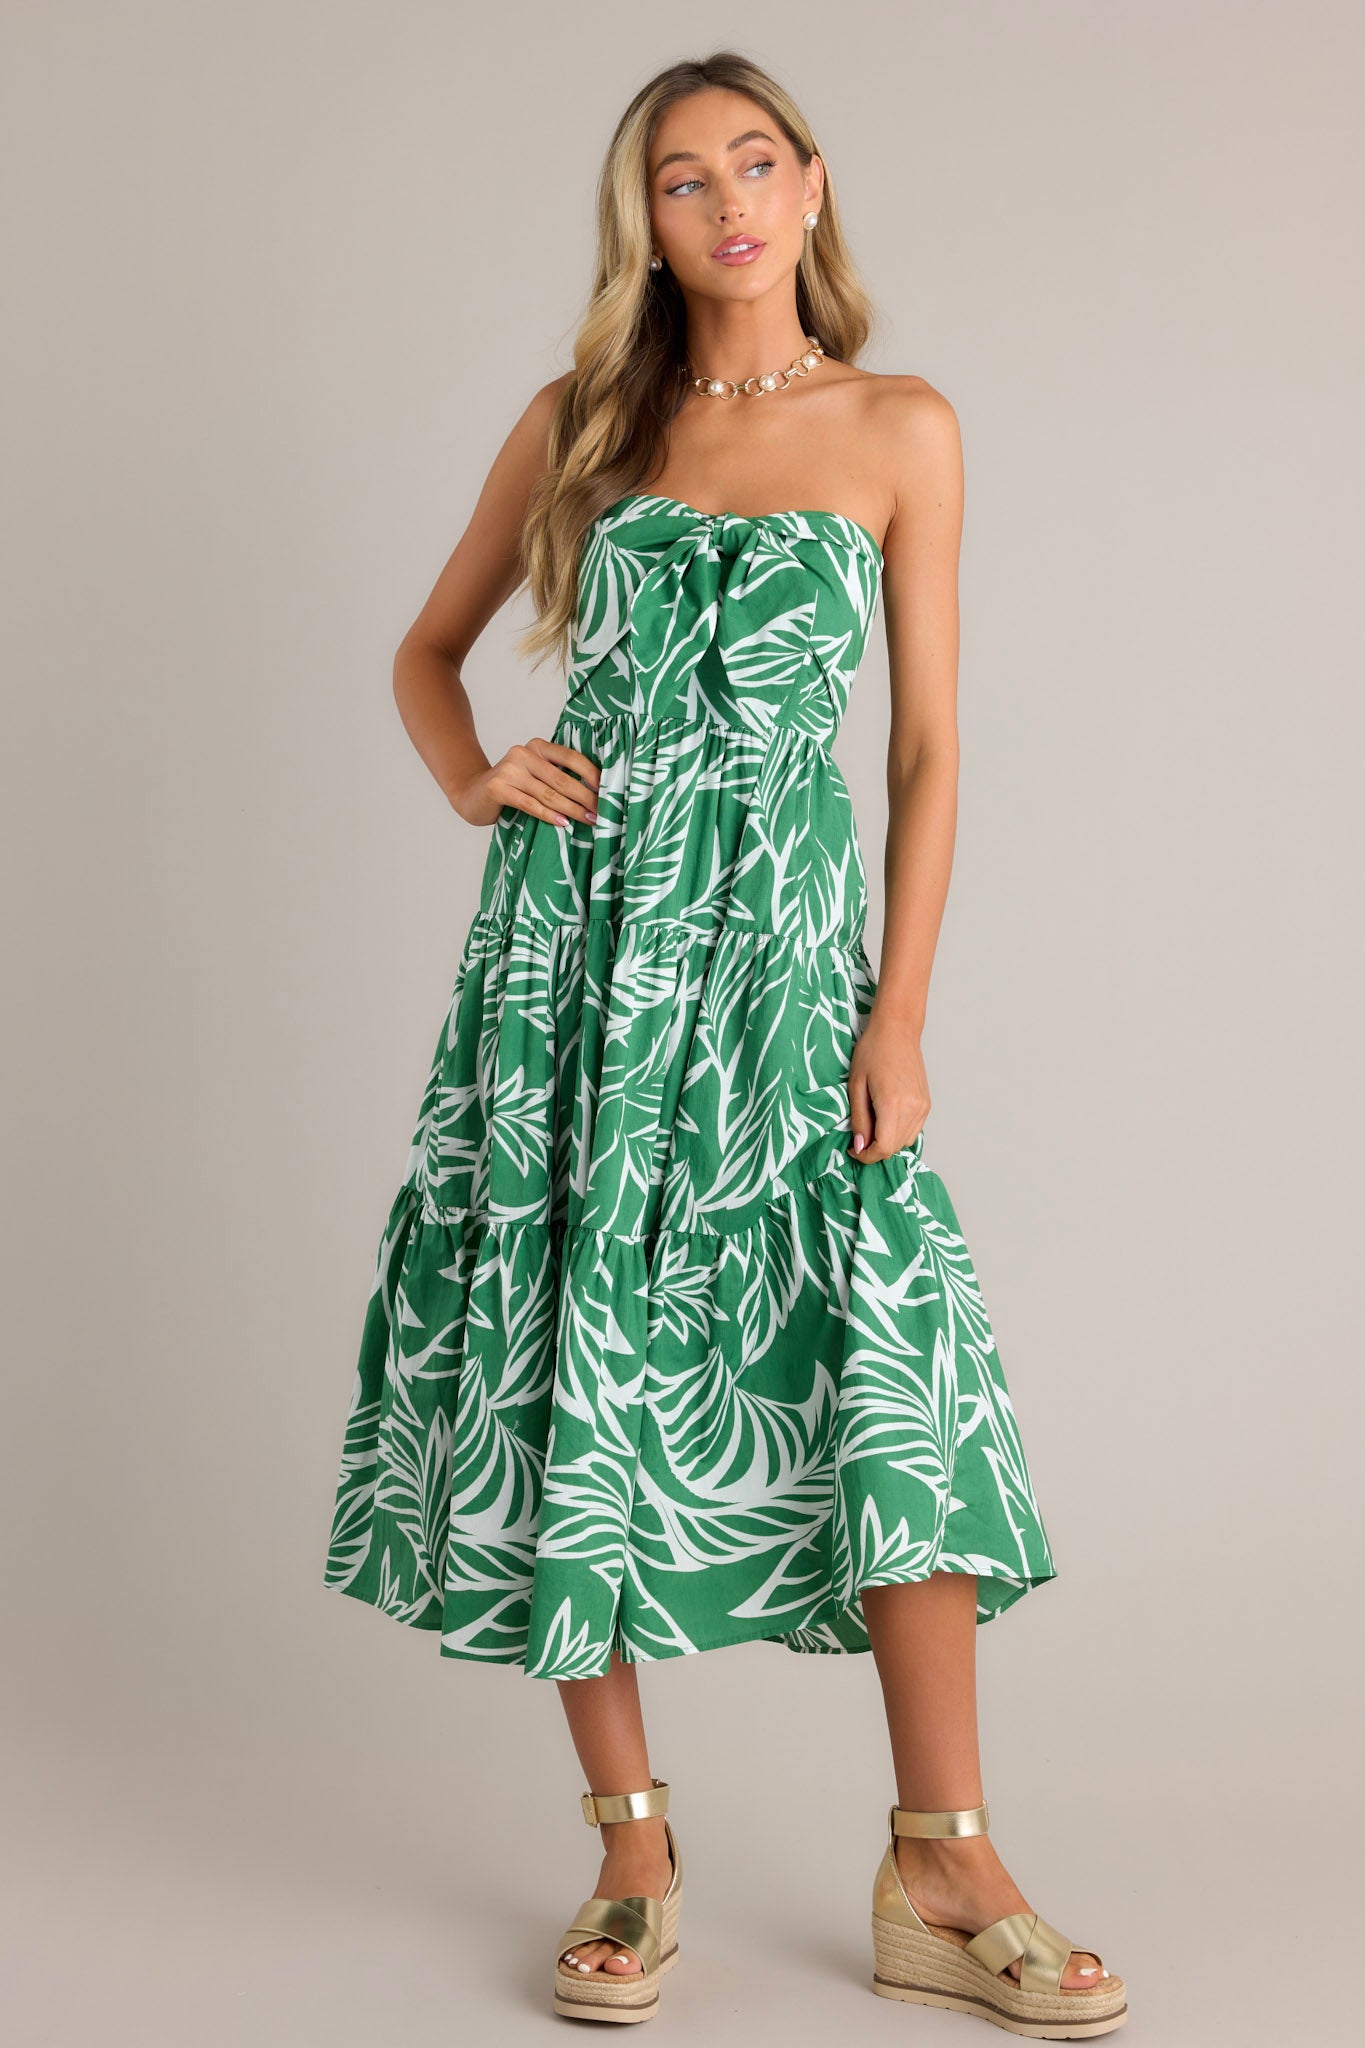 Front view of a green midi dress featuring a strapless neckline, boning in the bodice, a self-tie feature, a fully smocked insert in the back, and a tiered design.